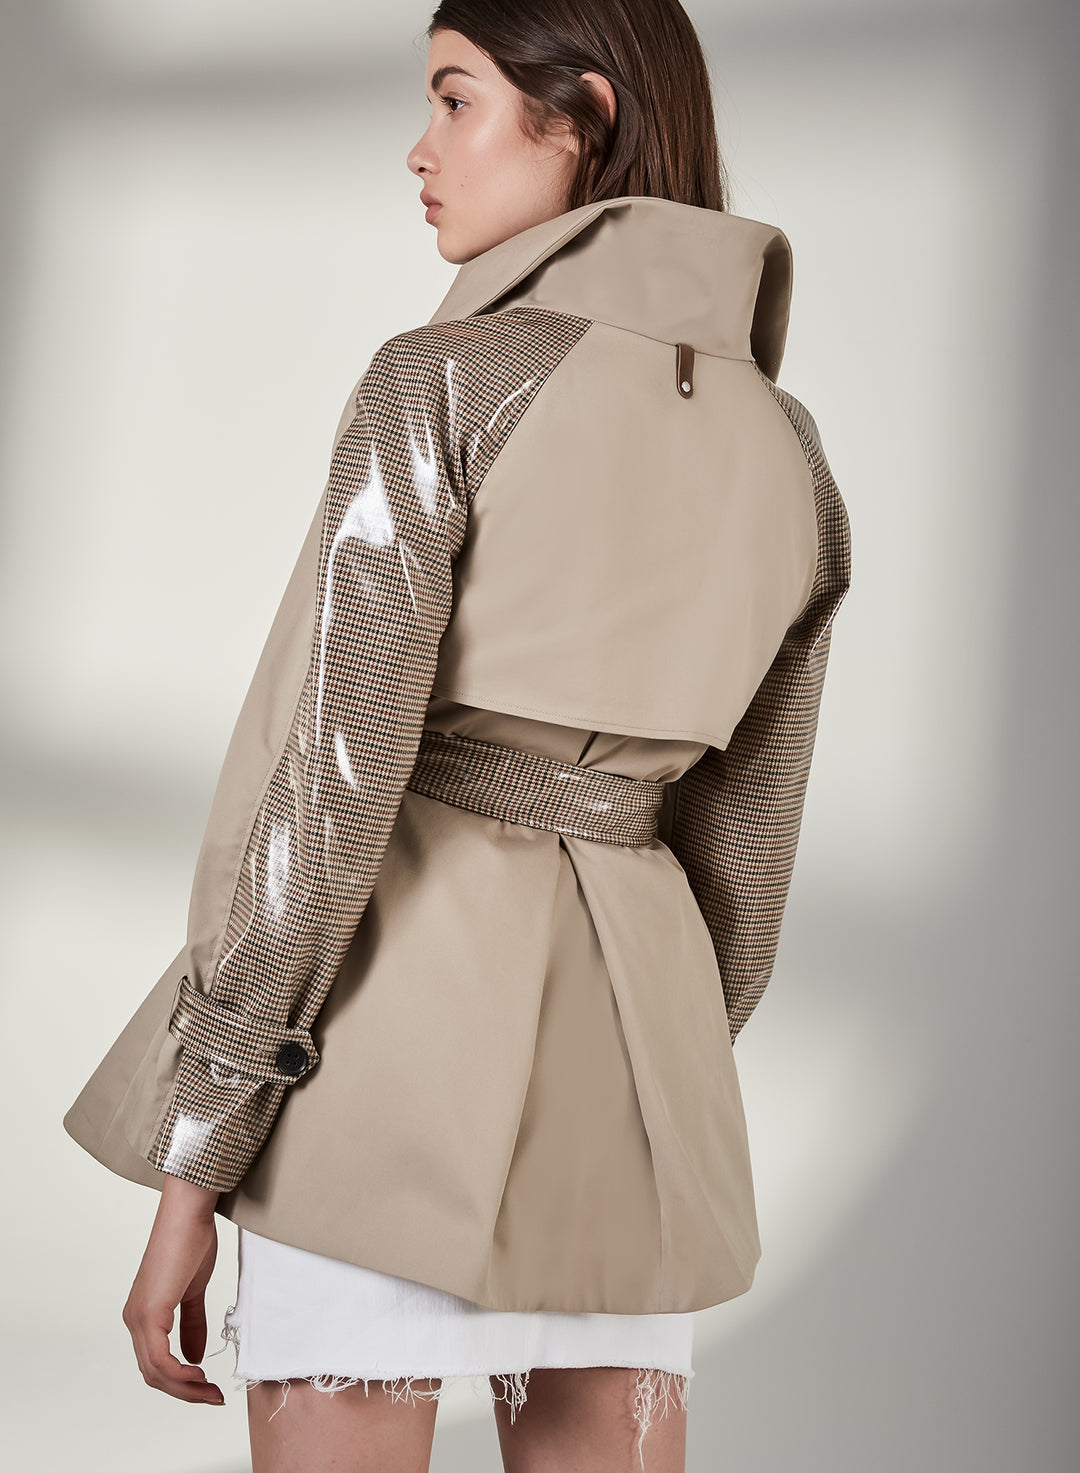 MACKAGE - Iva Belted Trench Coat in Sand